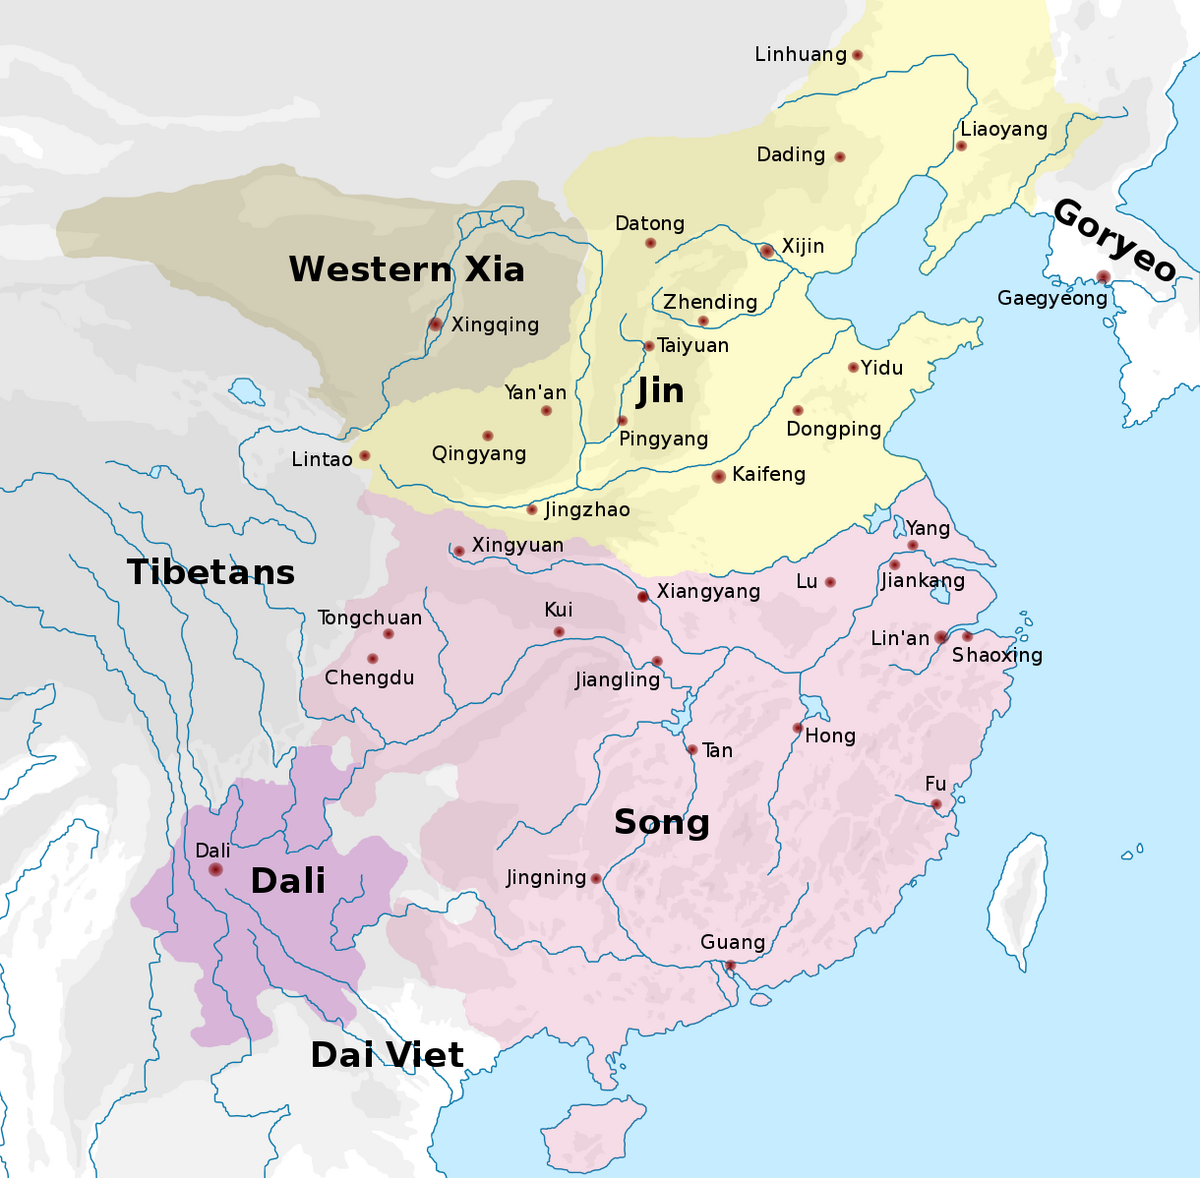 China during the Southern Song dynasty